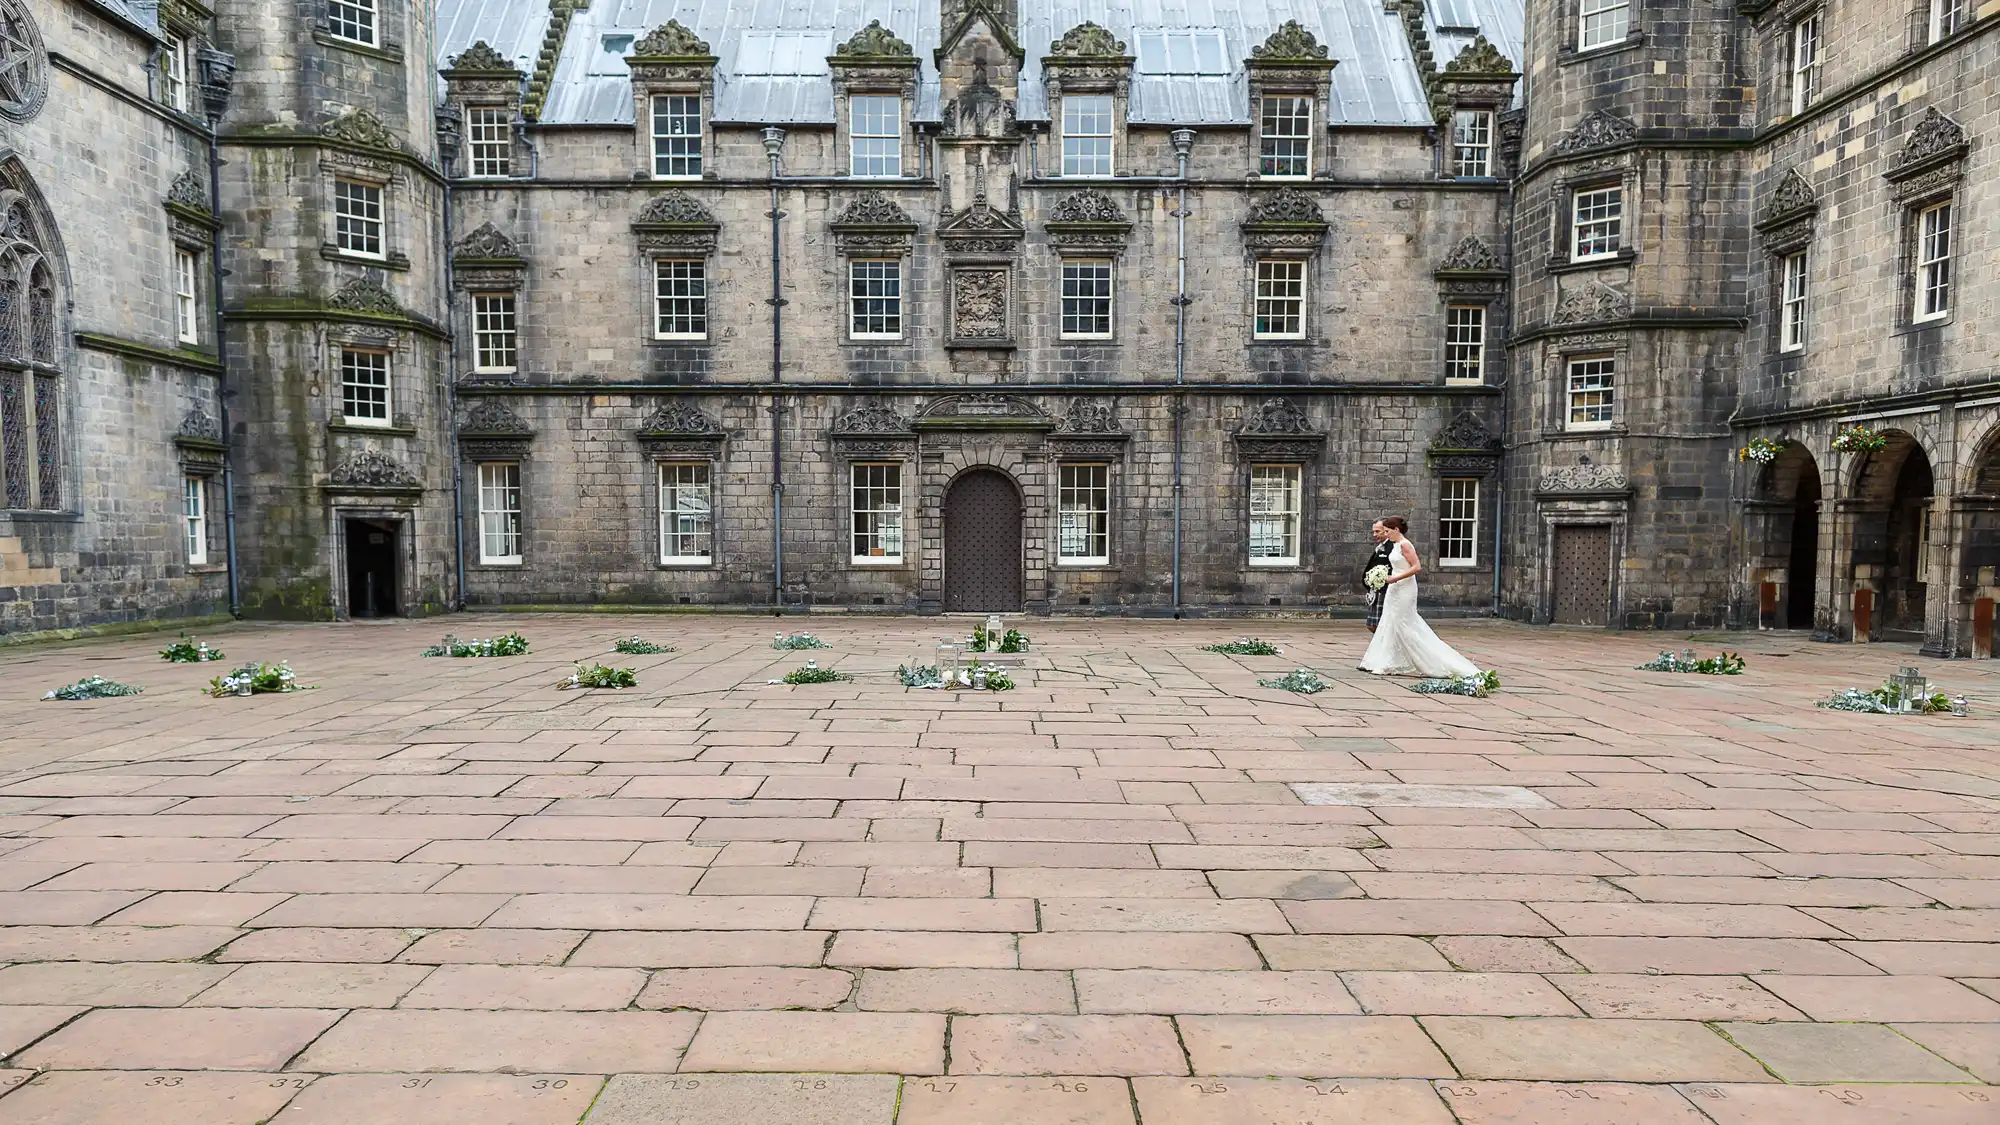 A bride walking alone across a cobblestone courtyard in front of an ornate, historical stone building with multiple windows and doors.